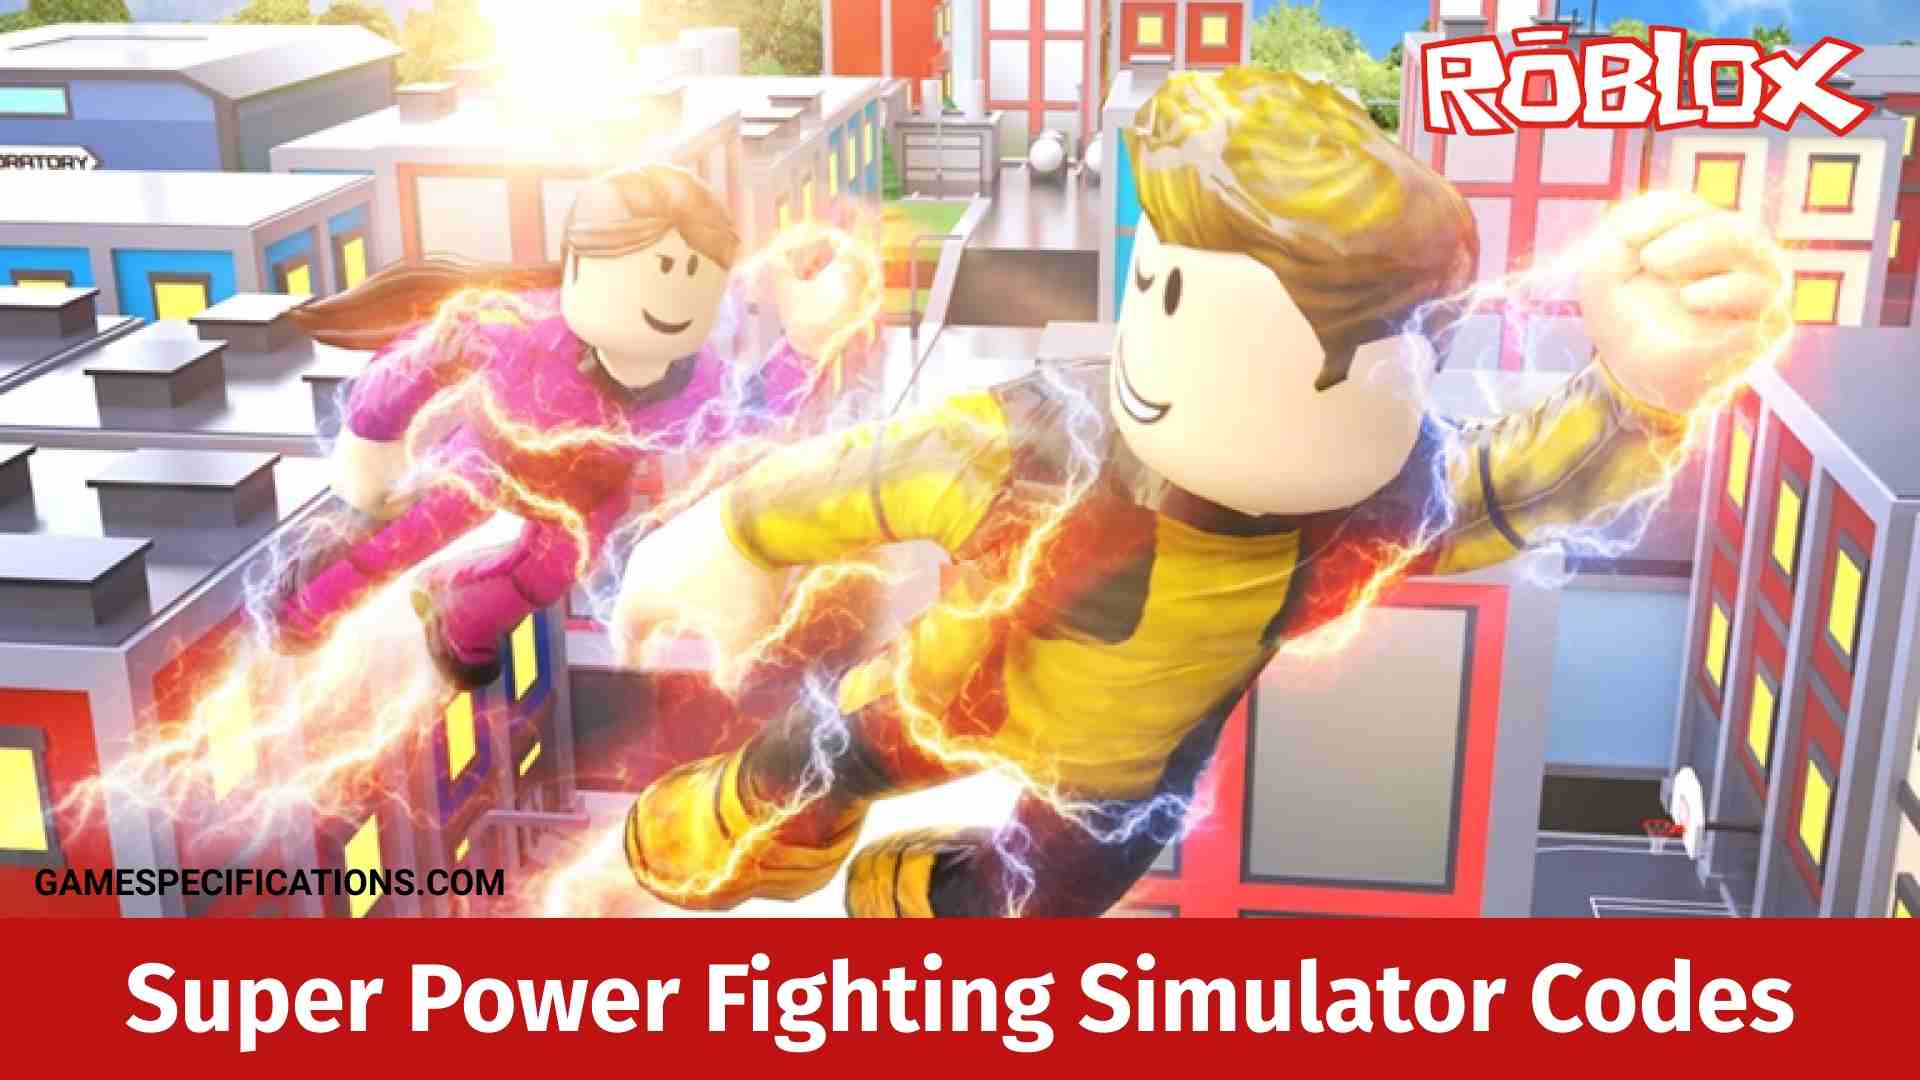 Roblox Super Power Fighting Simulator Codes July 2021 Game Specifications - 590 endur power simulator roblox